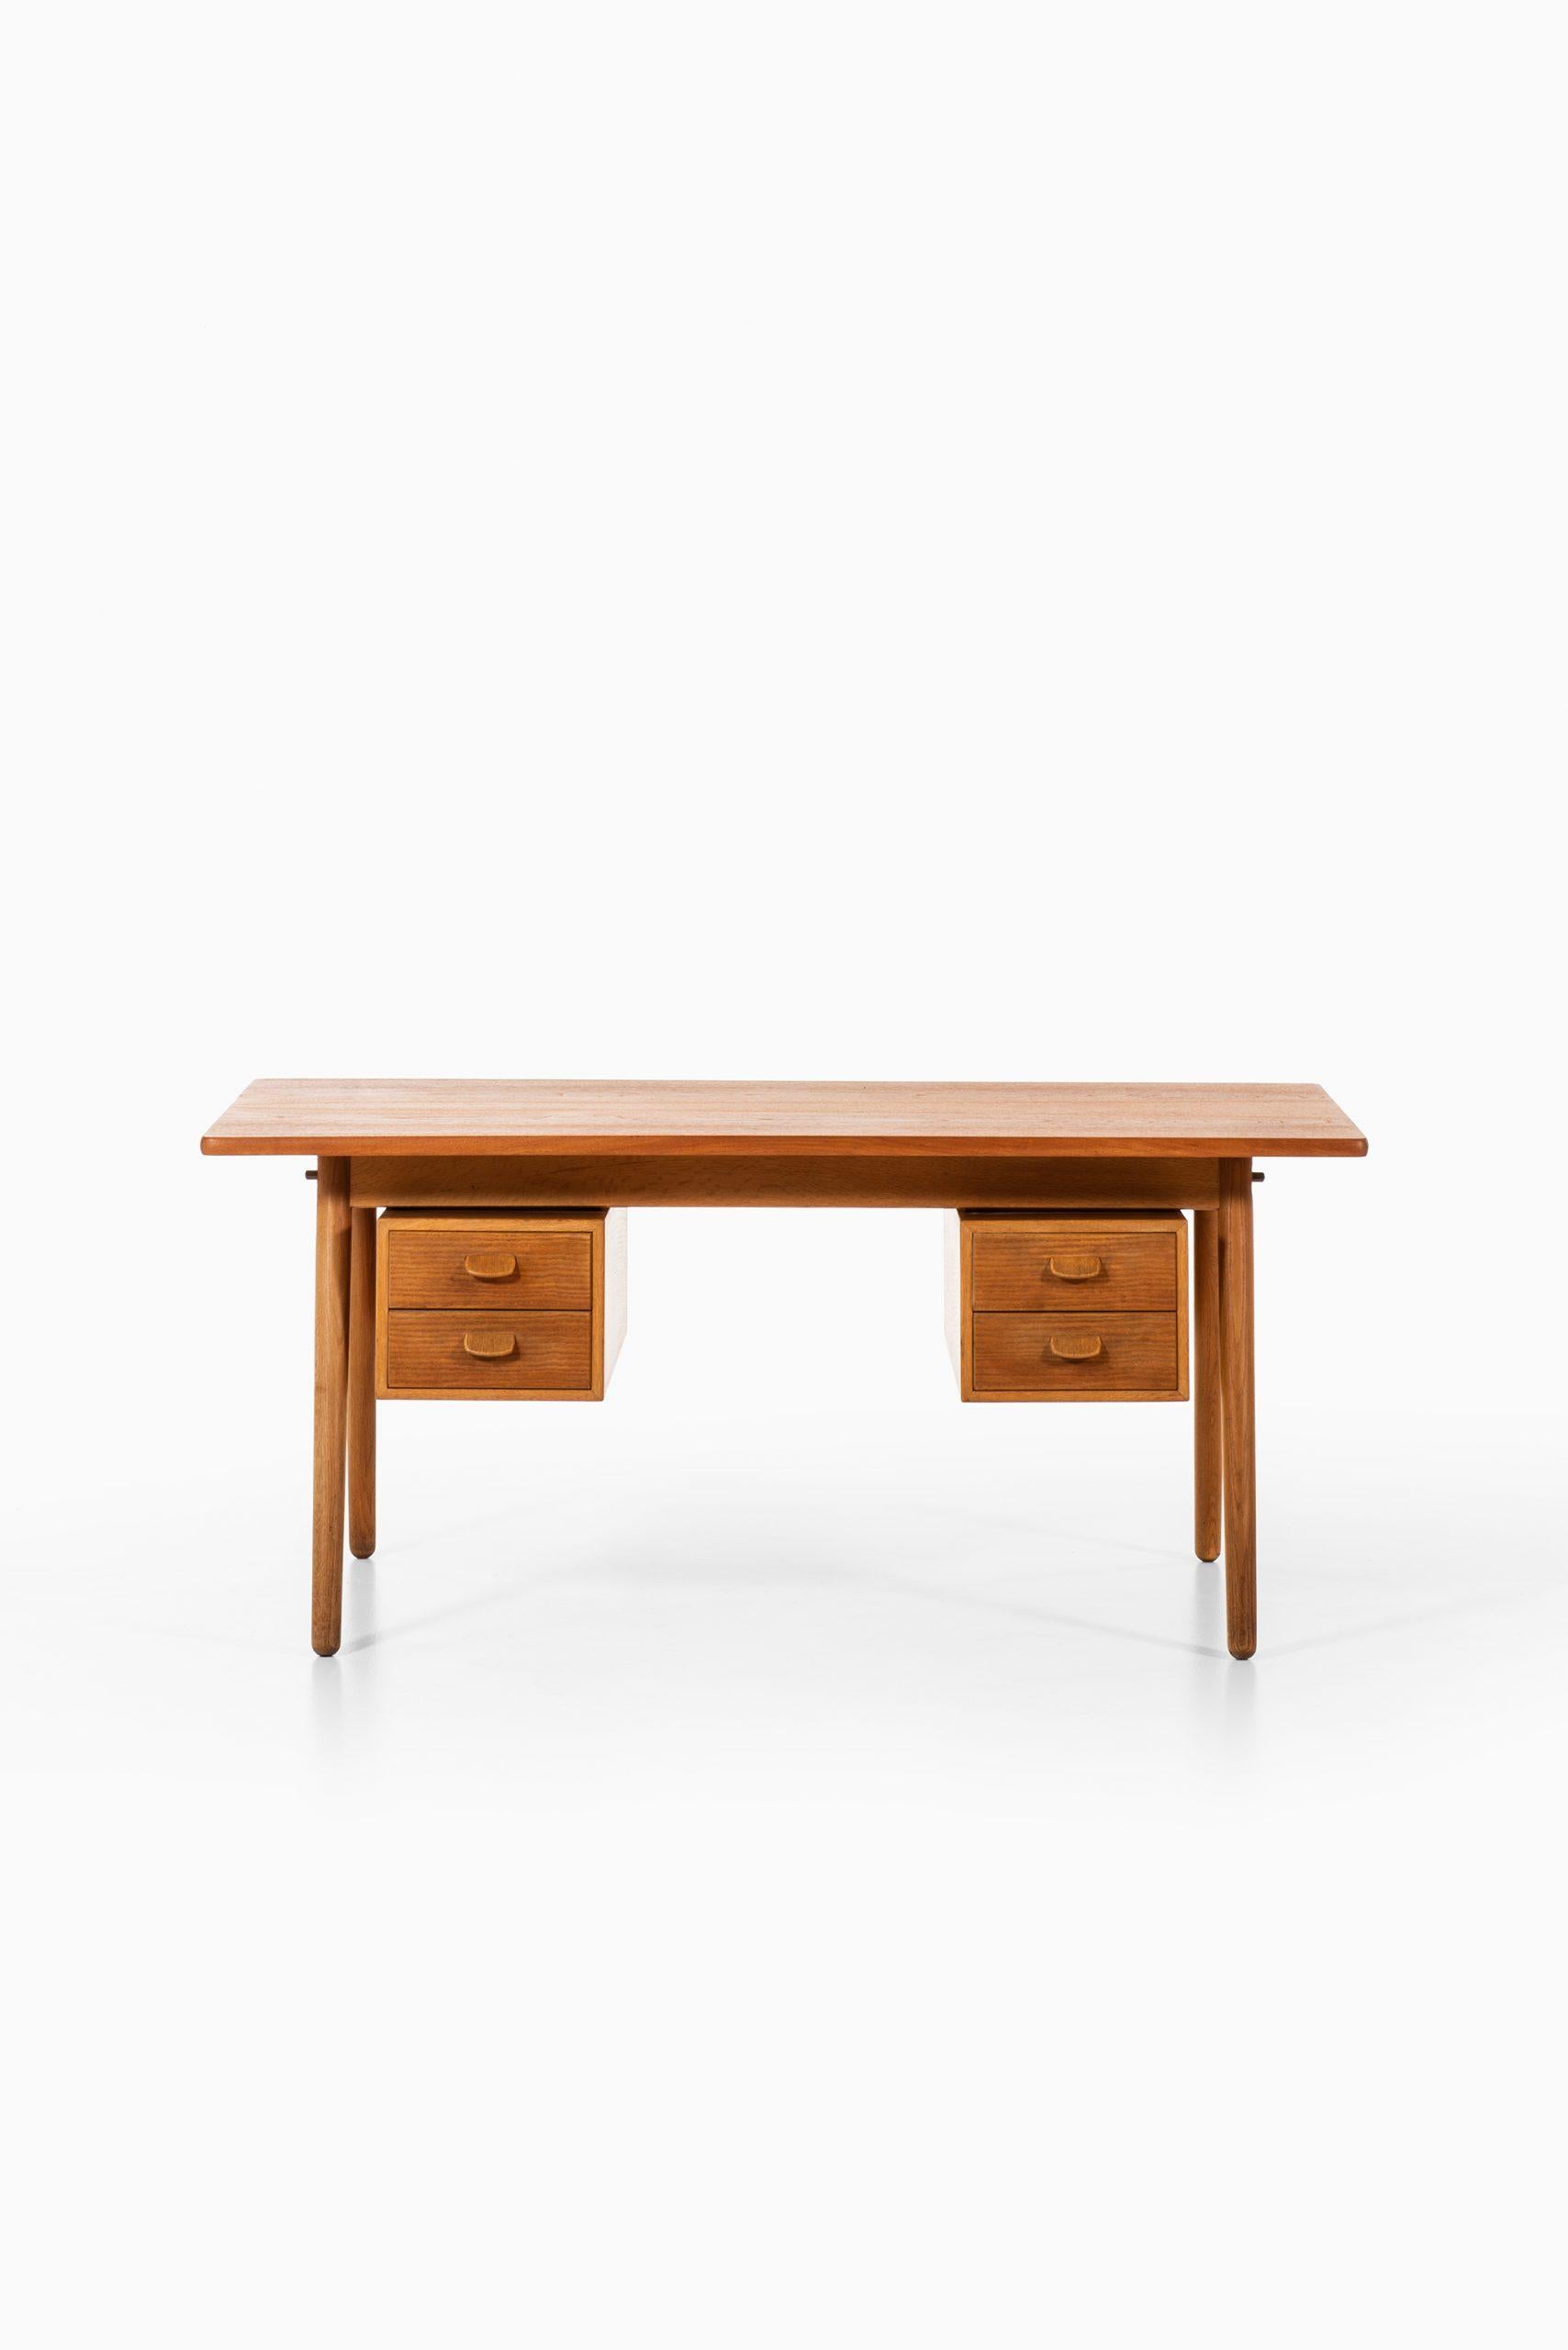 Very rare desk designed by Poul Volther. Produced by FDB Møbler in Denmark.